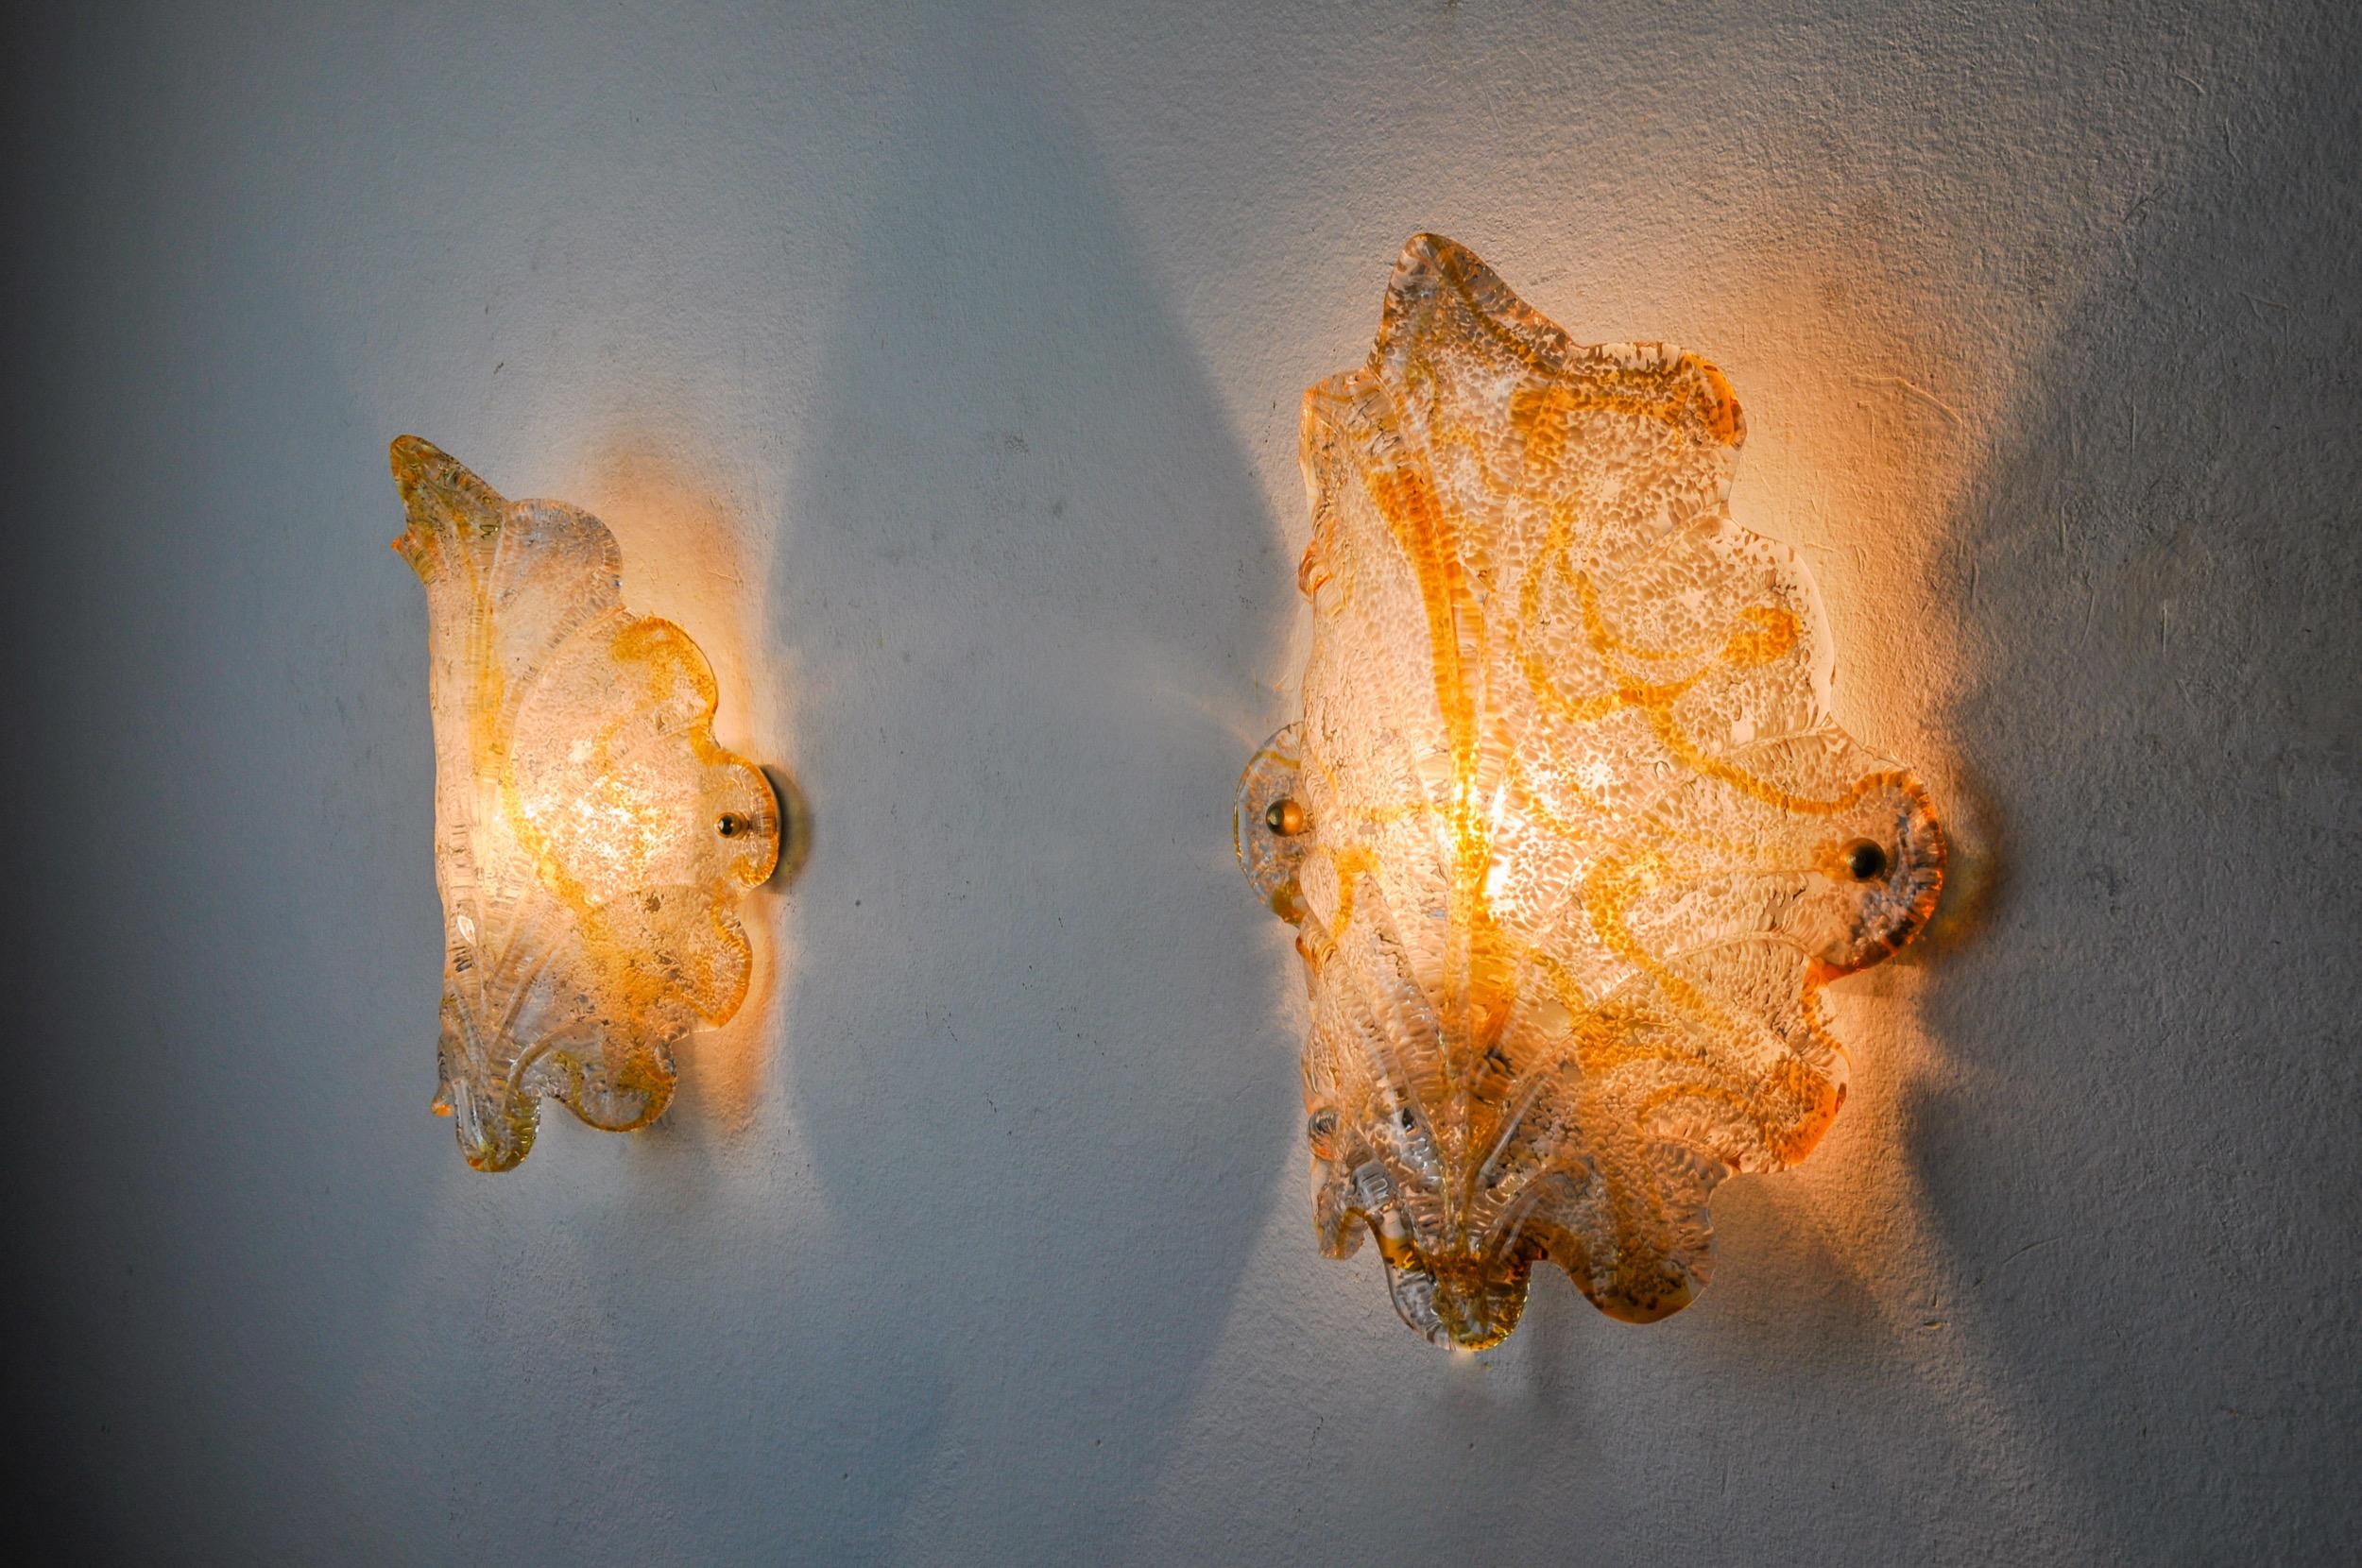 Very beautiful pair of floral sconces mazzega designated and produced in italy in the 70s. This pair of sconces is composed of a sheet of white and orange frosted murano glass supported by a white metal structure. Rare design object that will